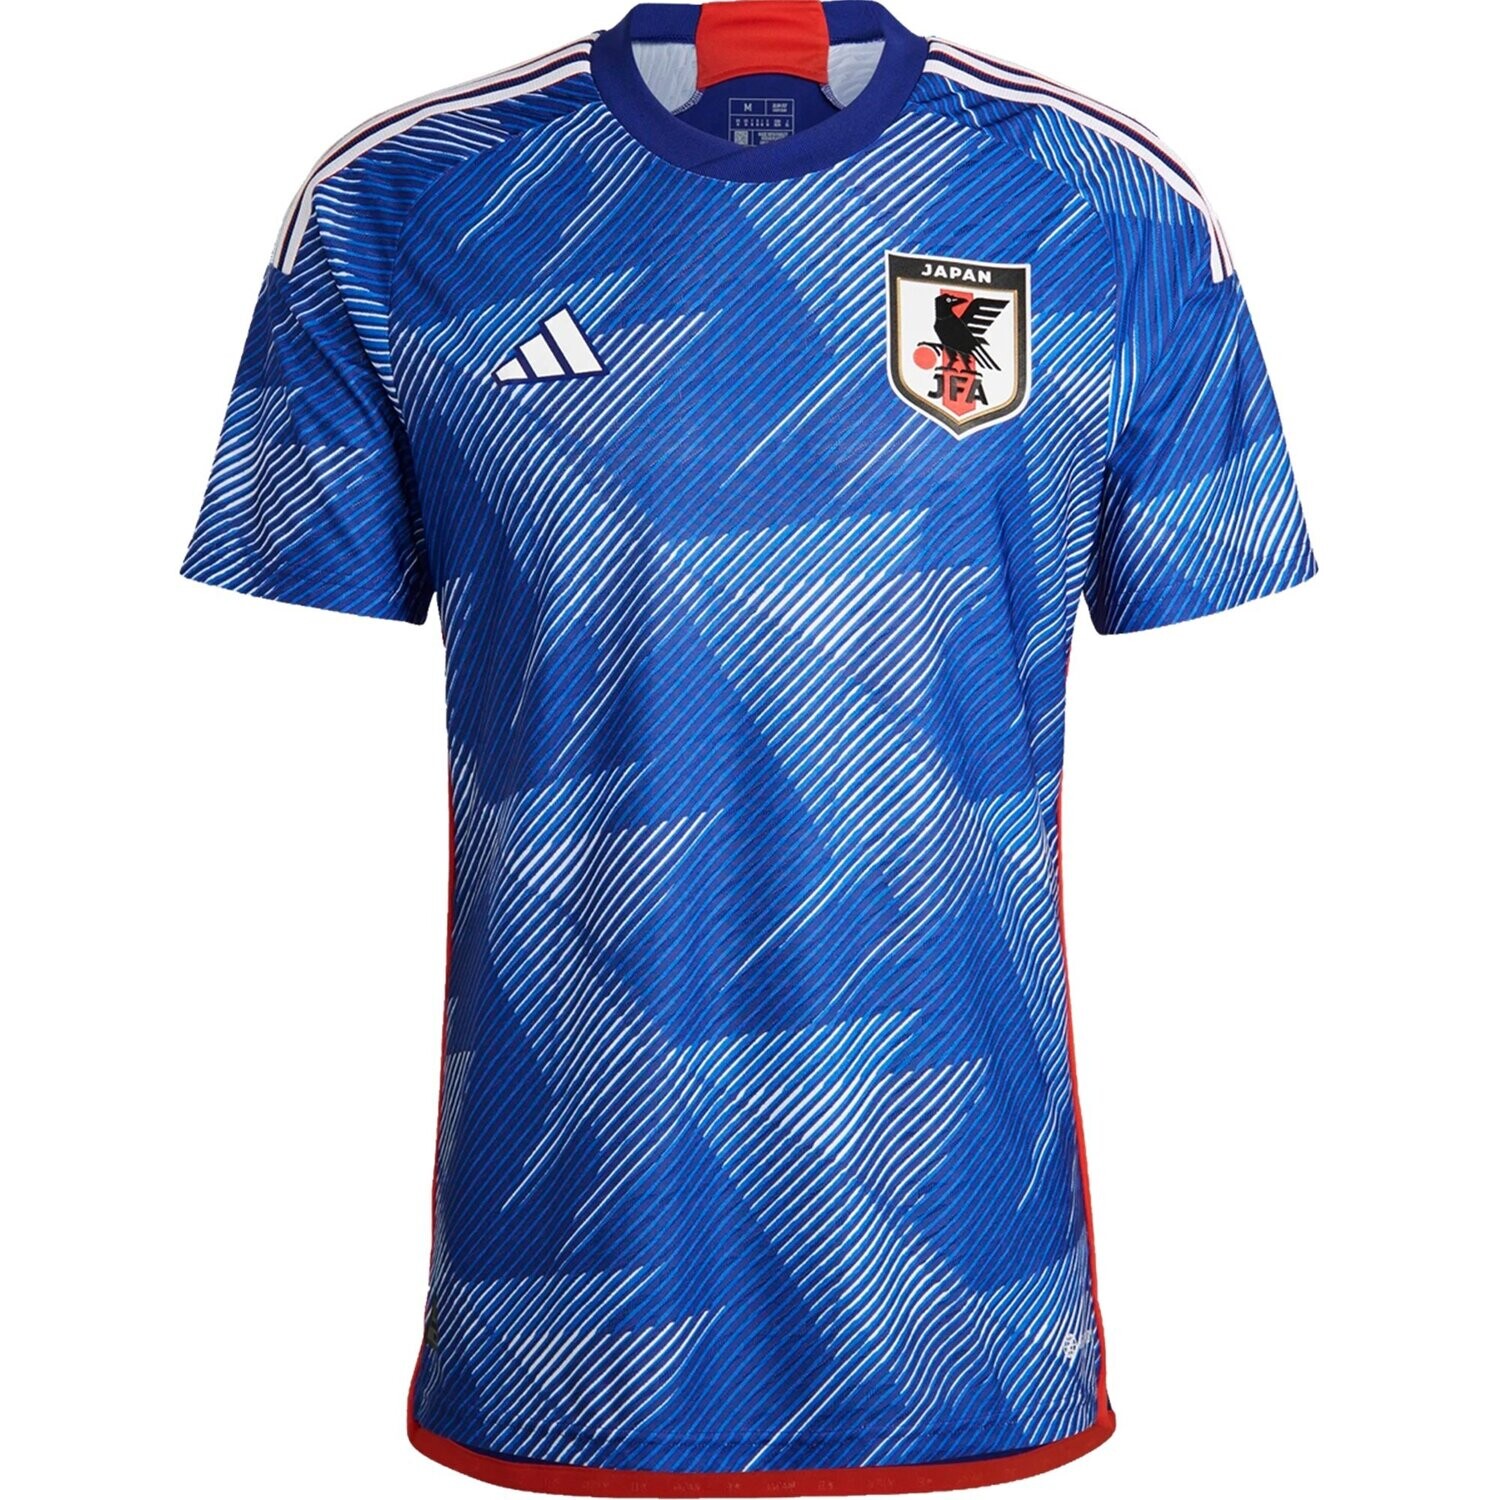 Japan World Cup Home Soccer Jersey 2022 Player Version (EURO SIZING)